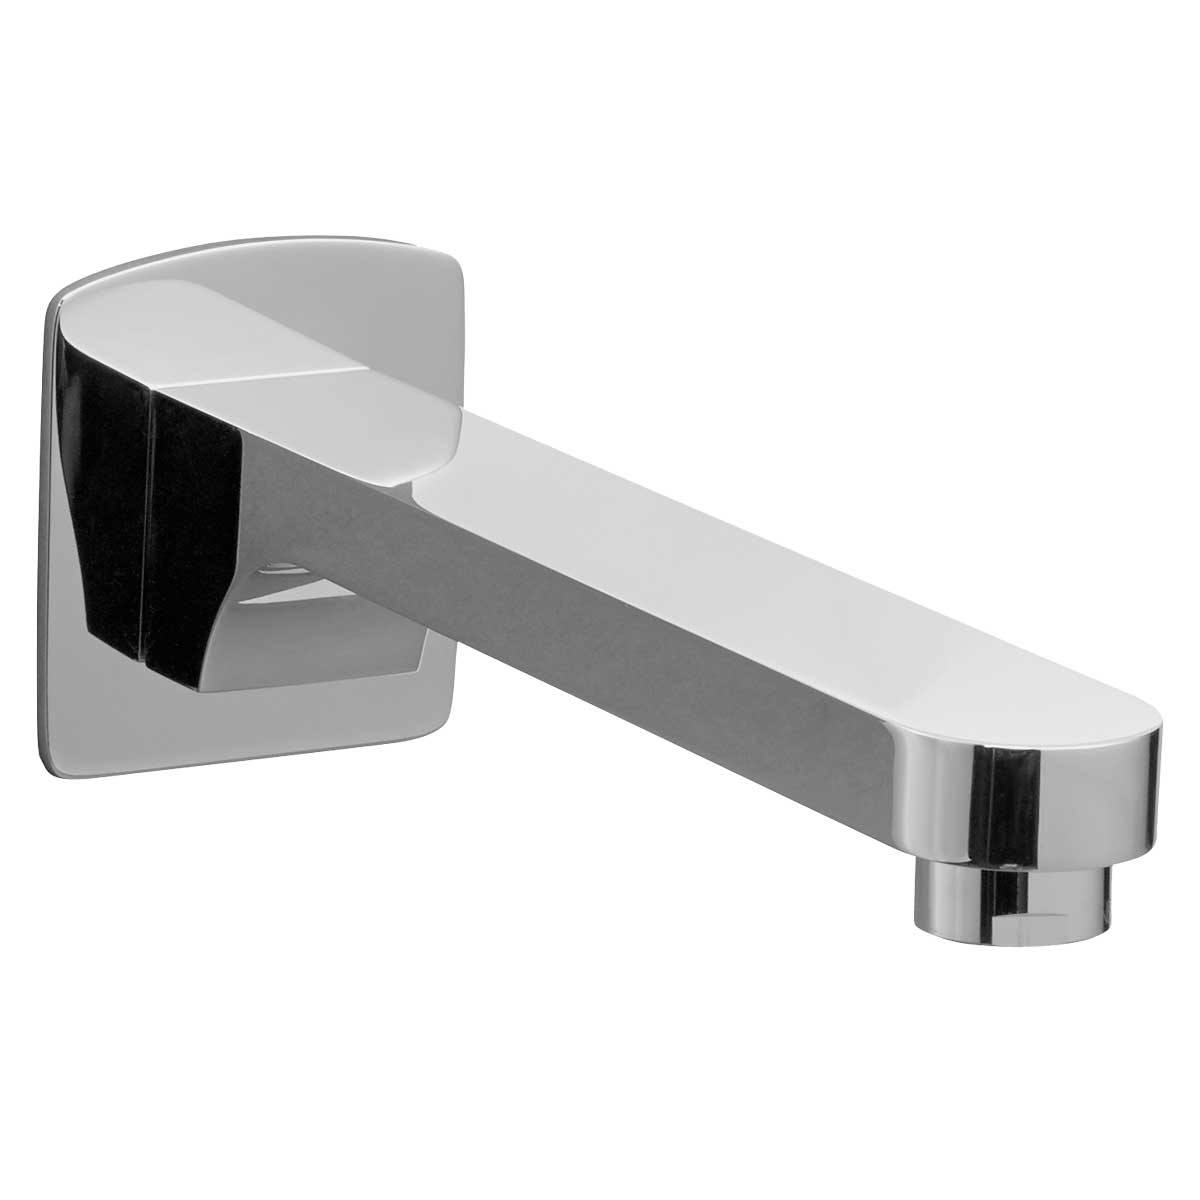 Equility wall tub spout